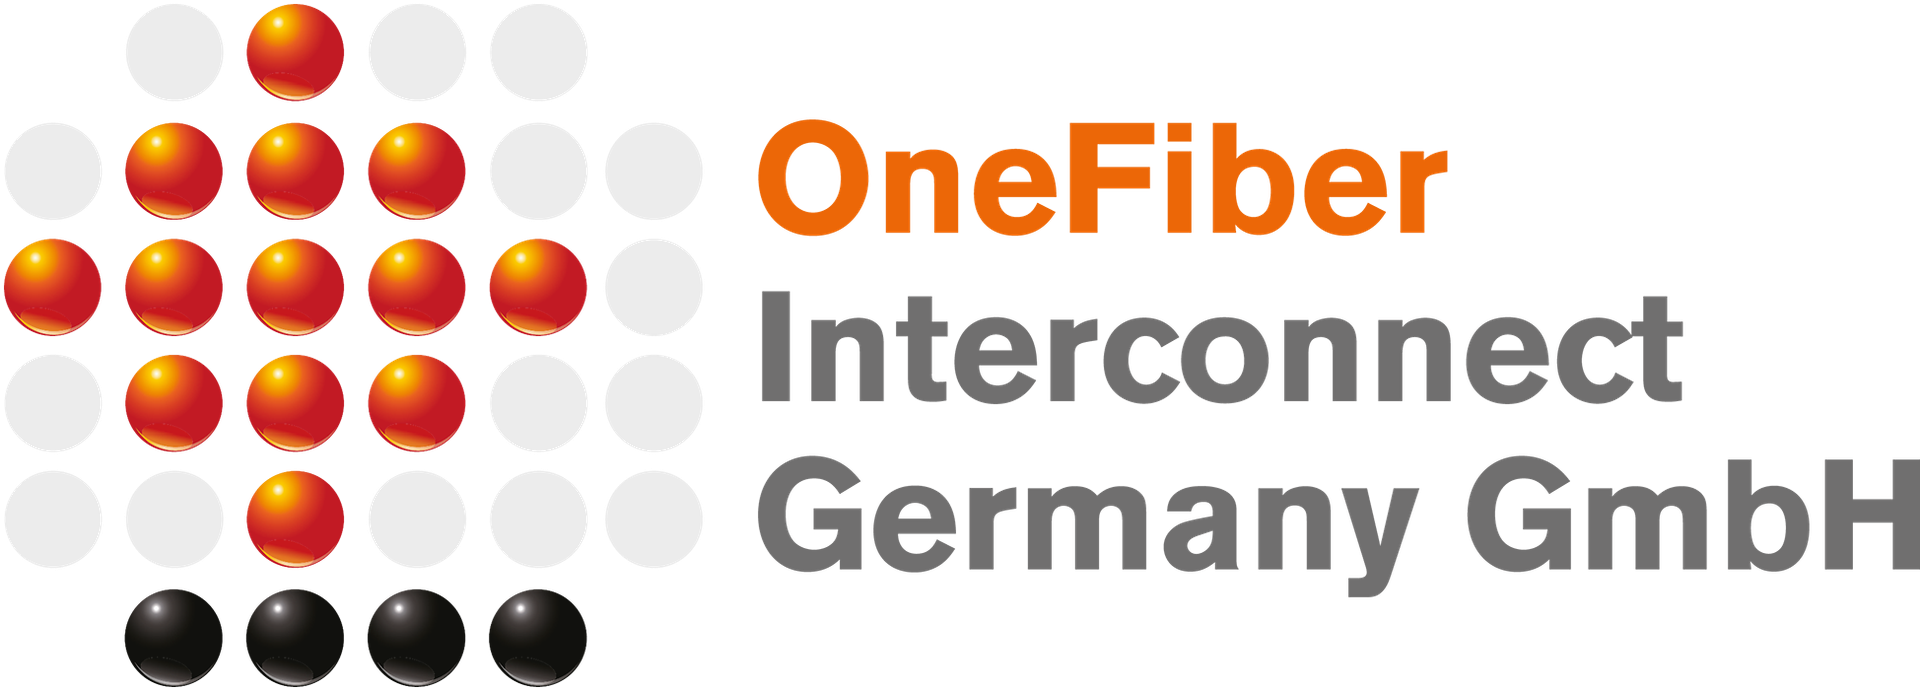 OneFiber Interconnect Germany GmbH